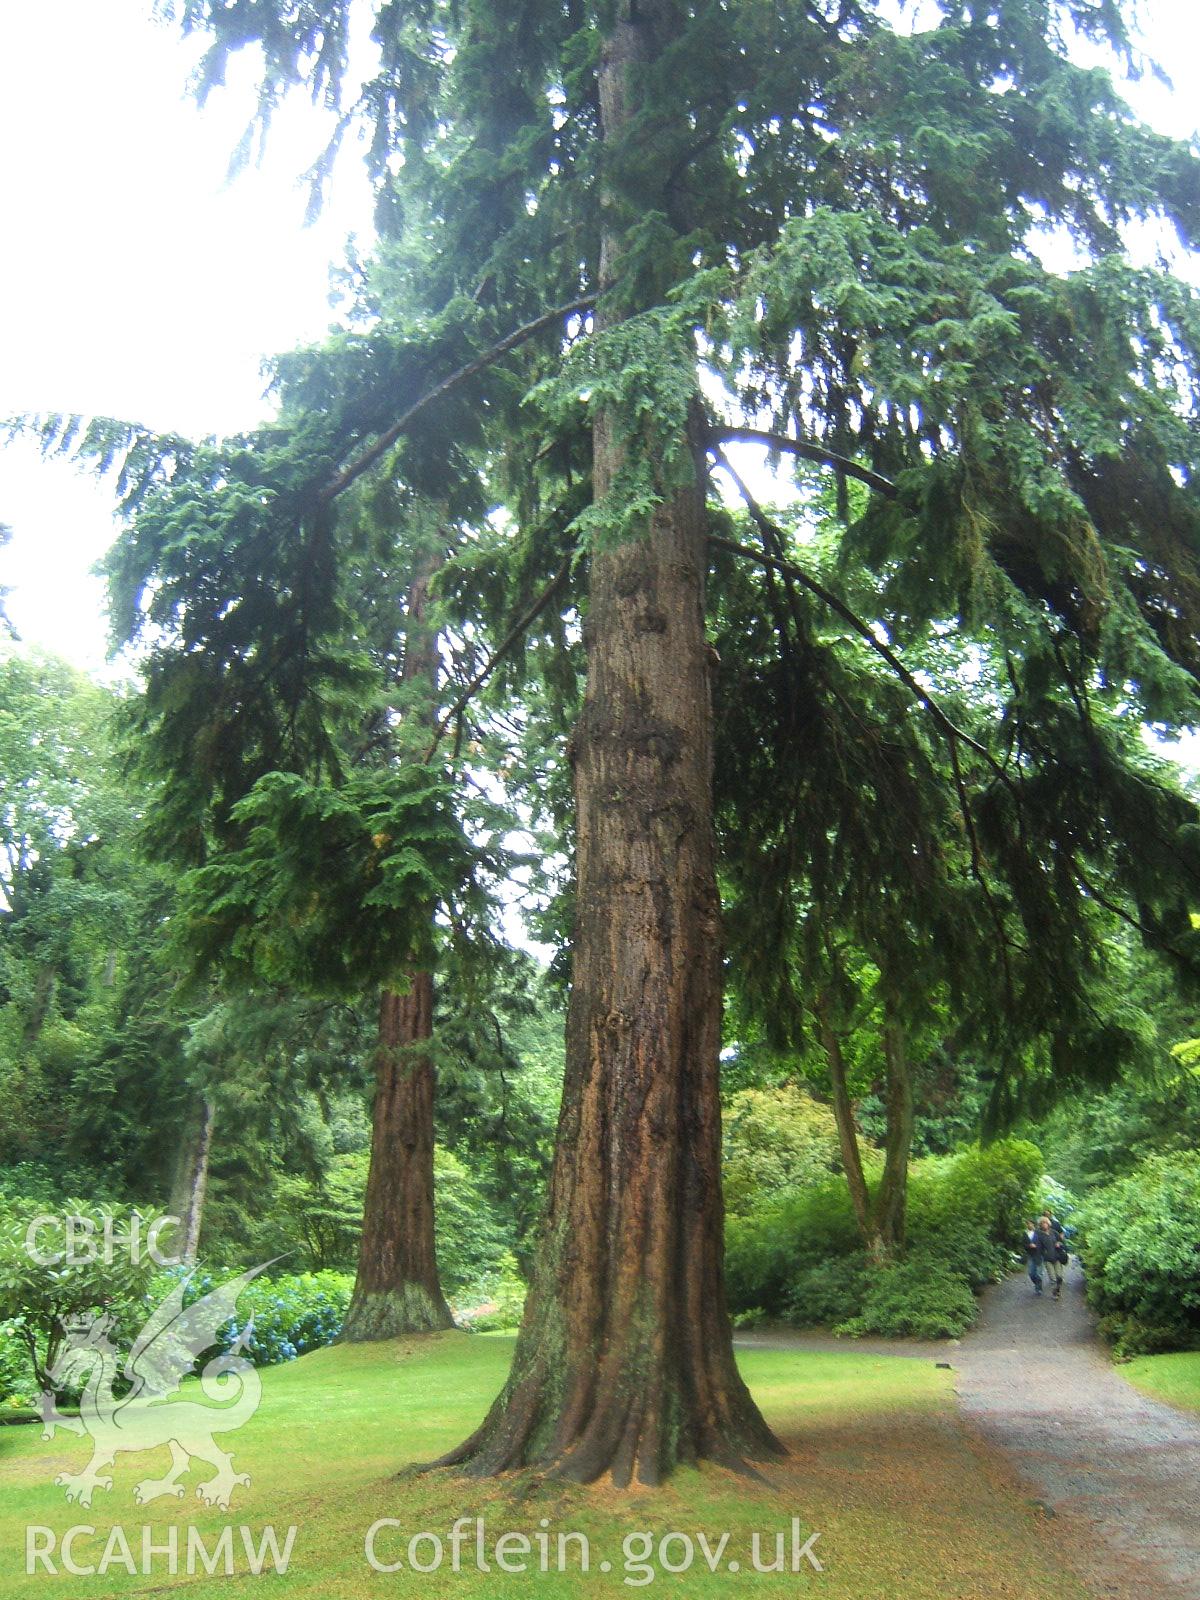 Western Hemlock with Sequoiadendron giganteum or Wellingtonia 44.5m (146ft) high beyond from the N.W.